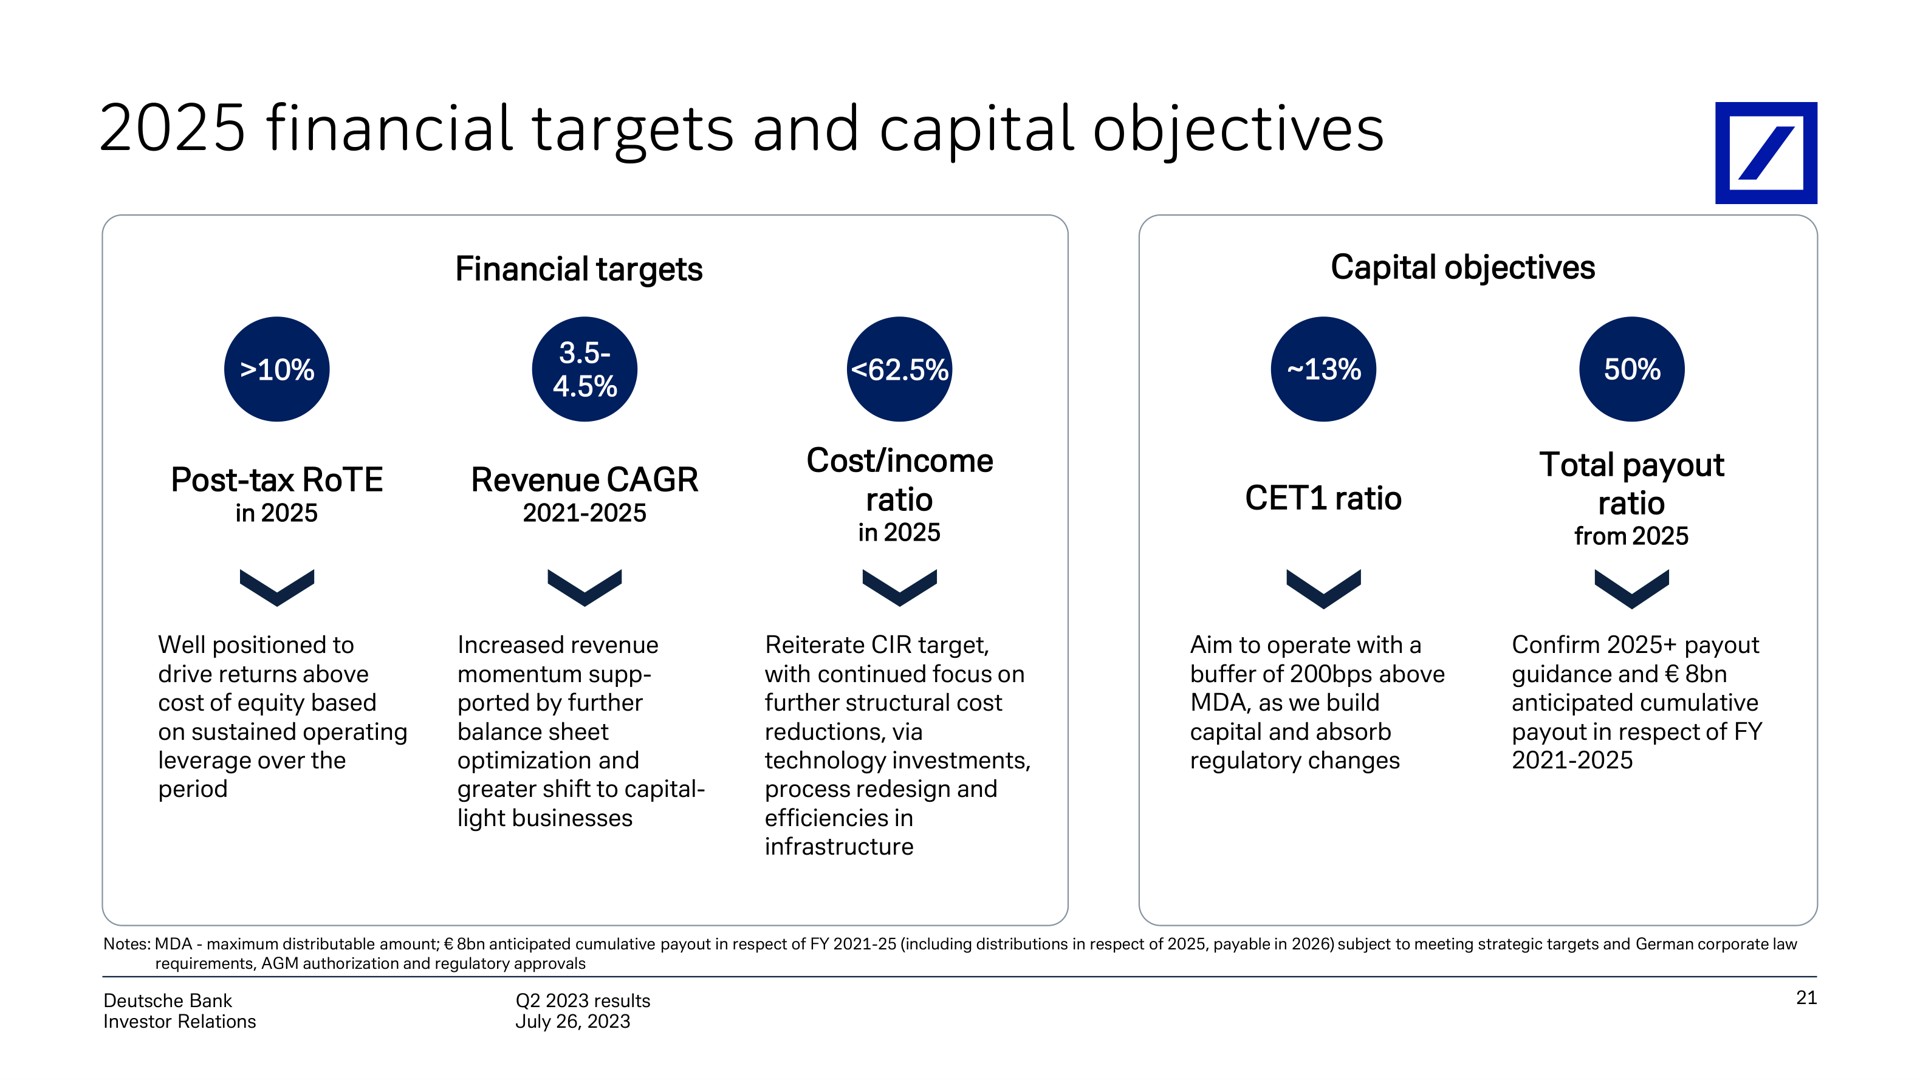 financial targets and capital objectives | Deutsche Bank